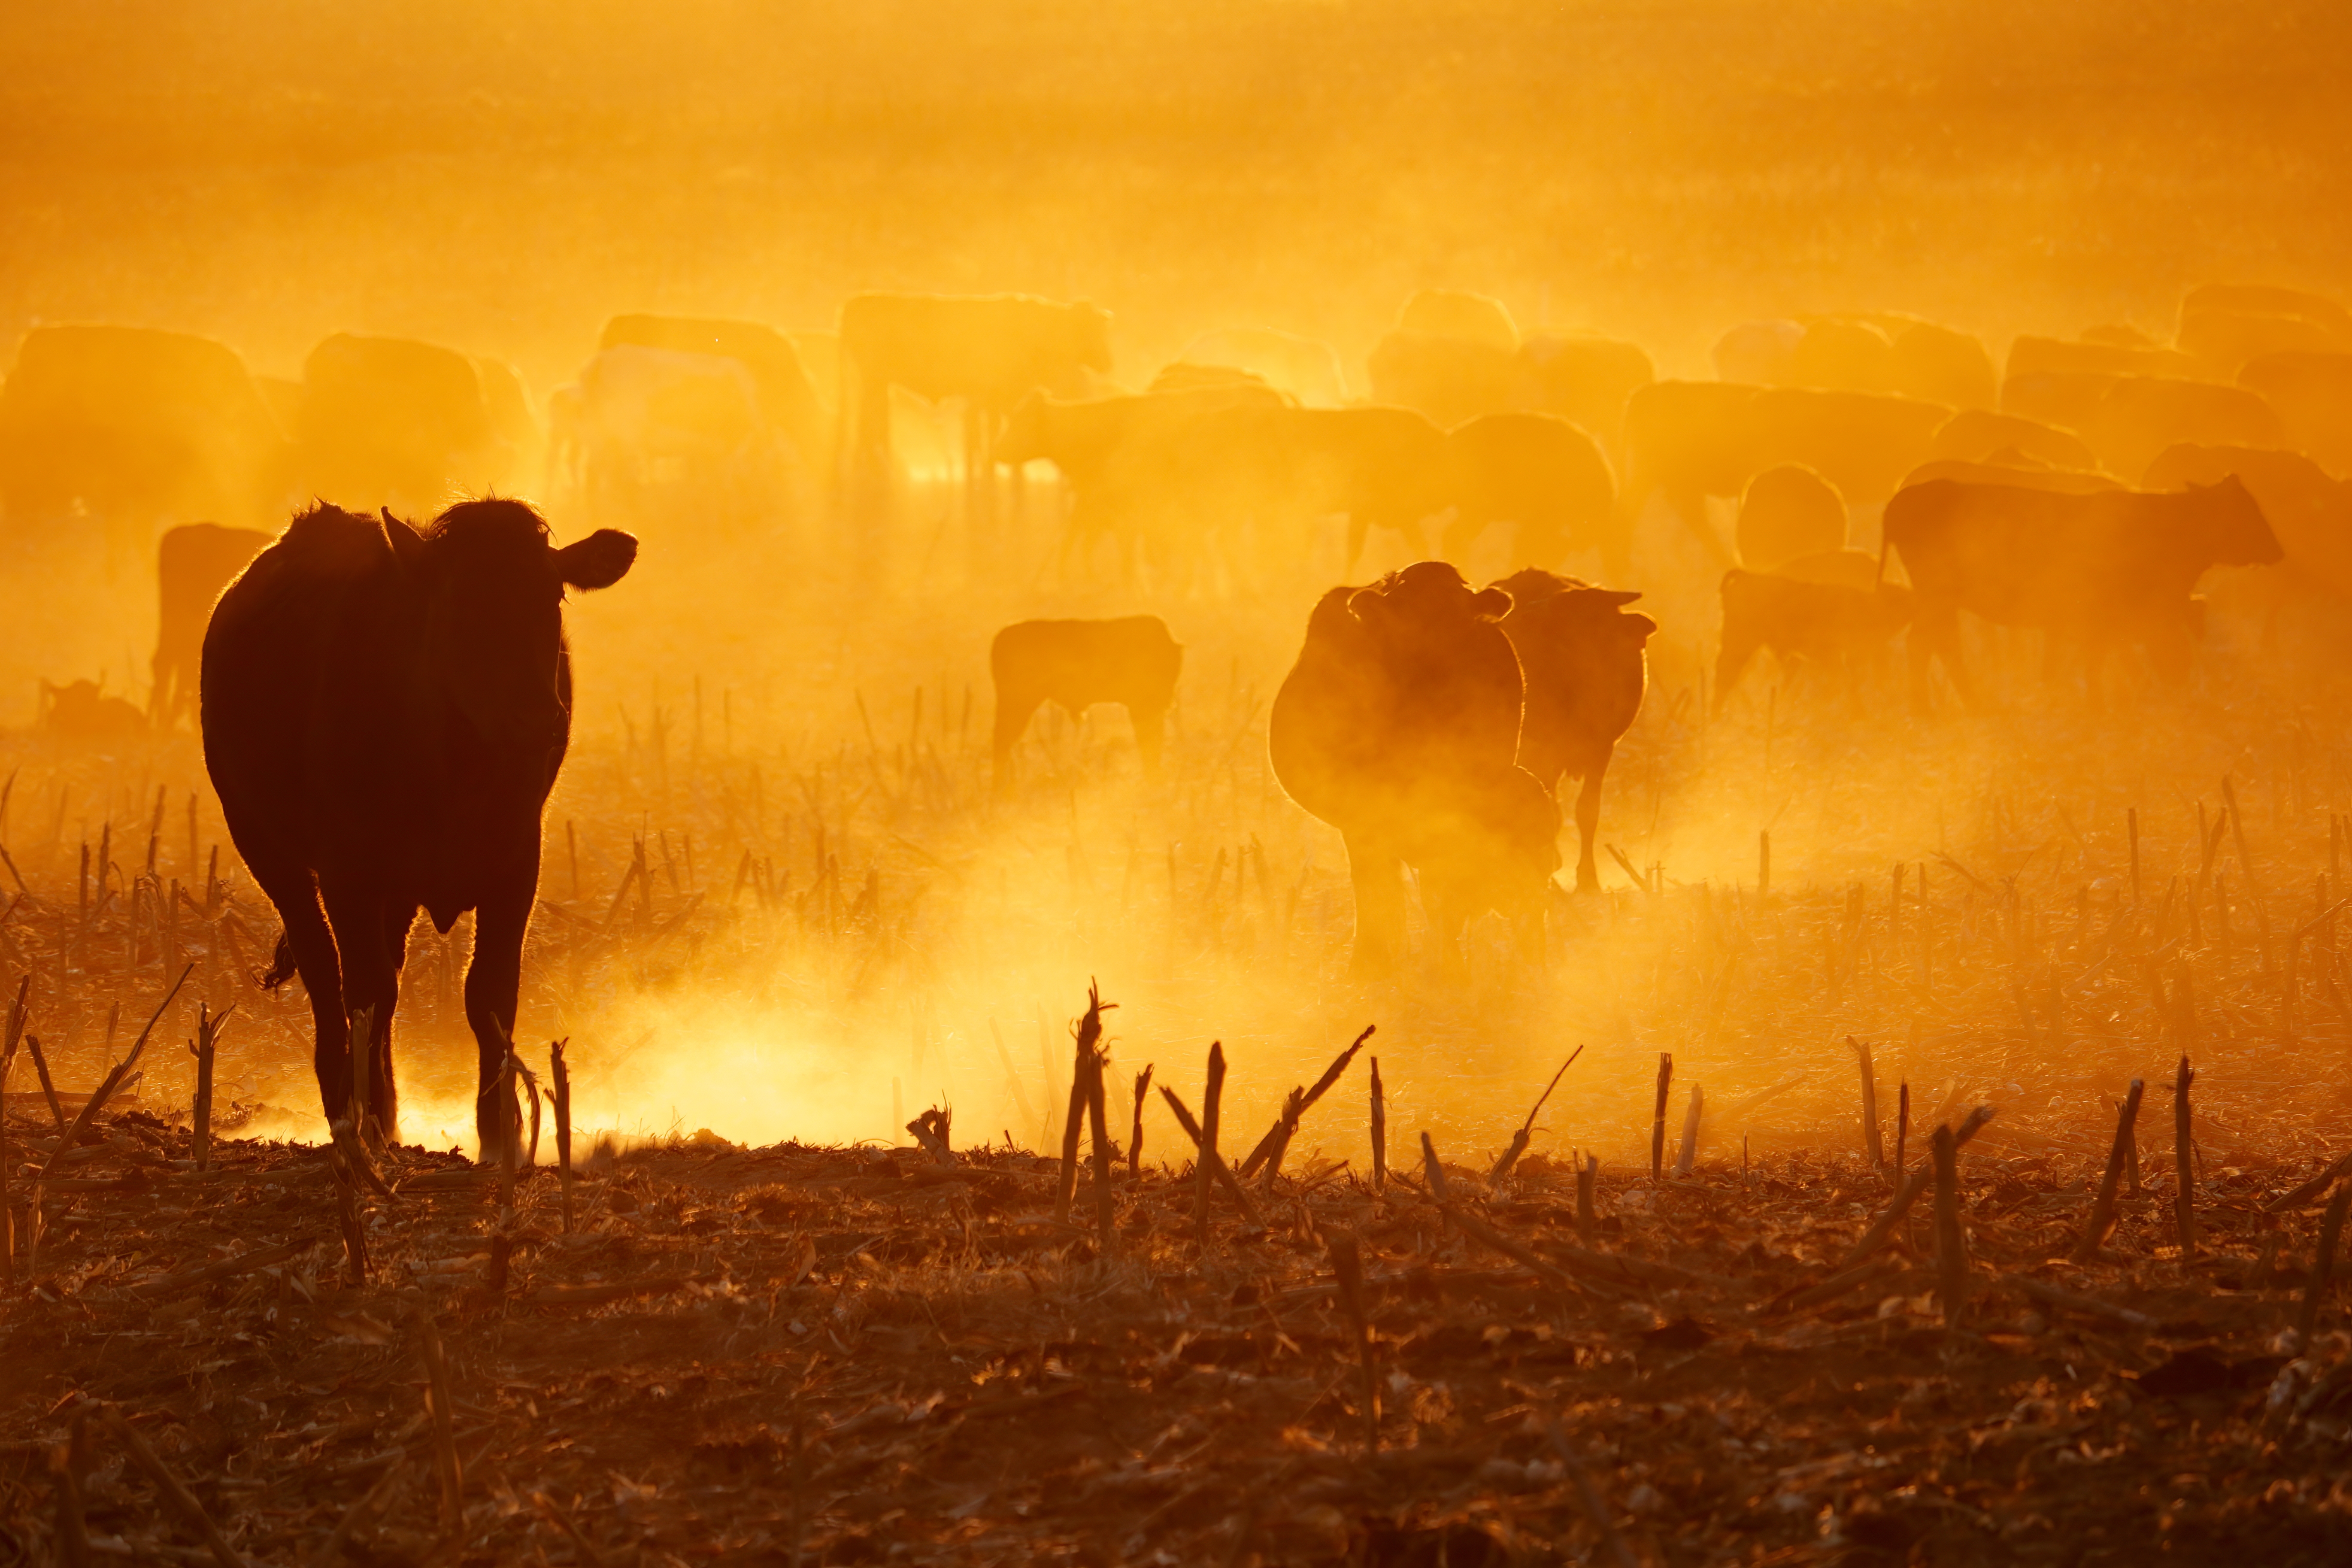 Silhouette of free-range cattle walking on dusty field at sunset, South Africa